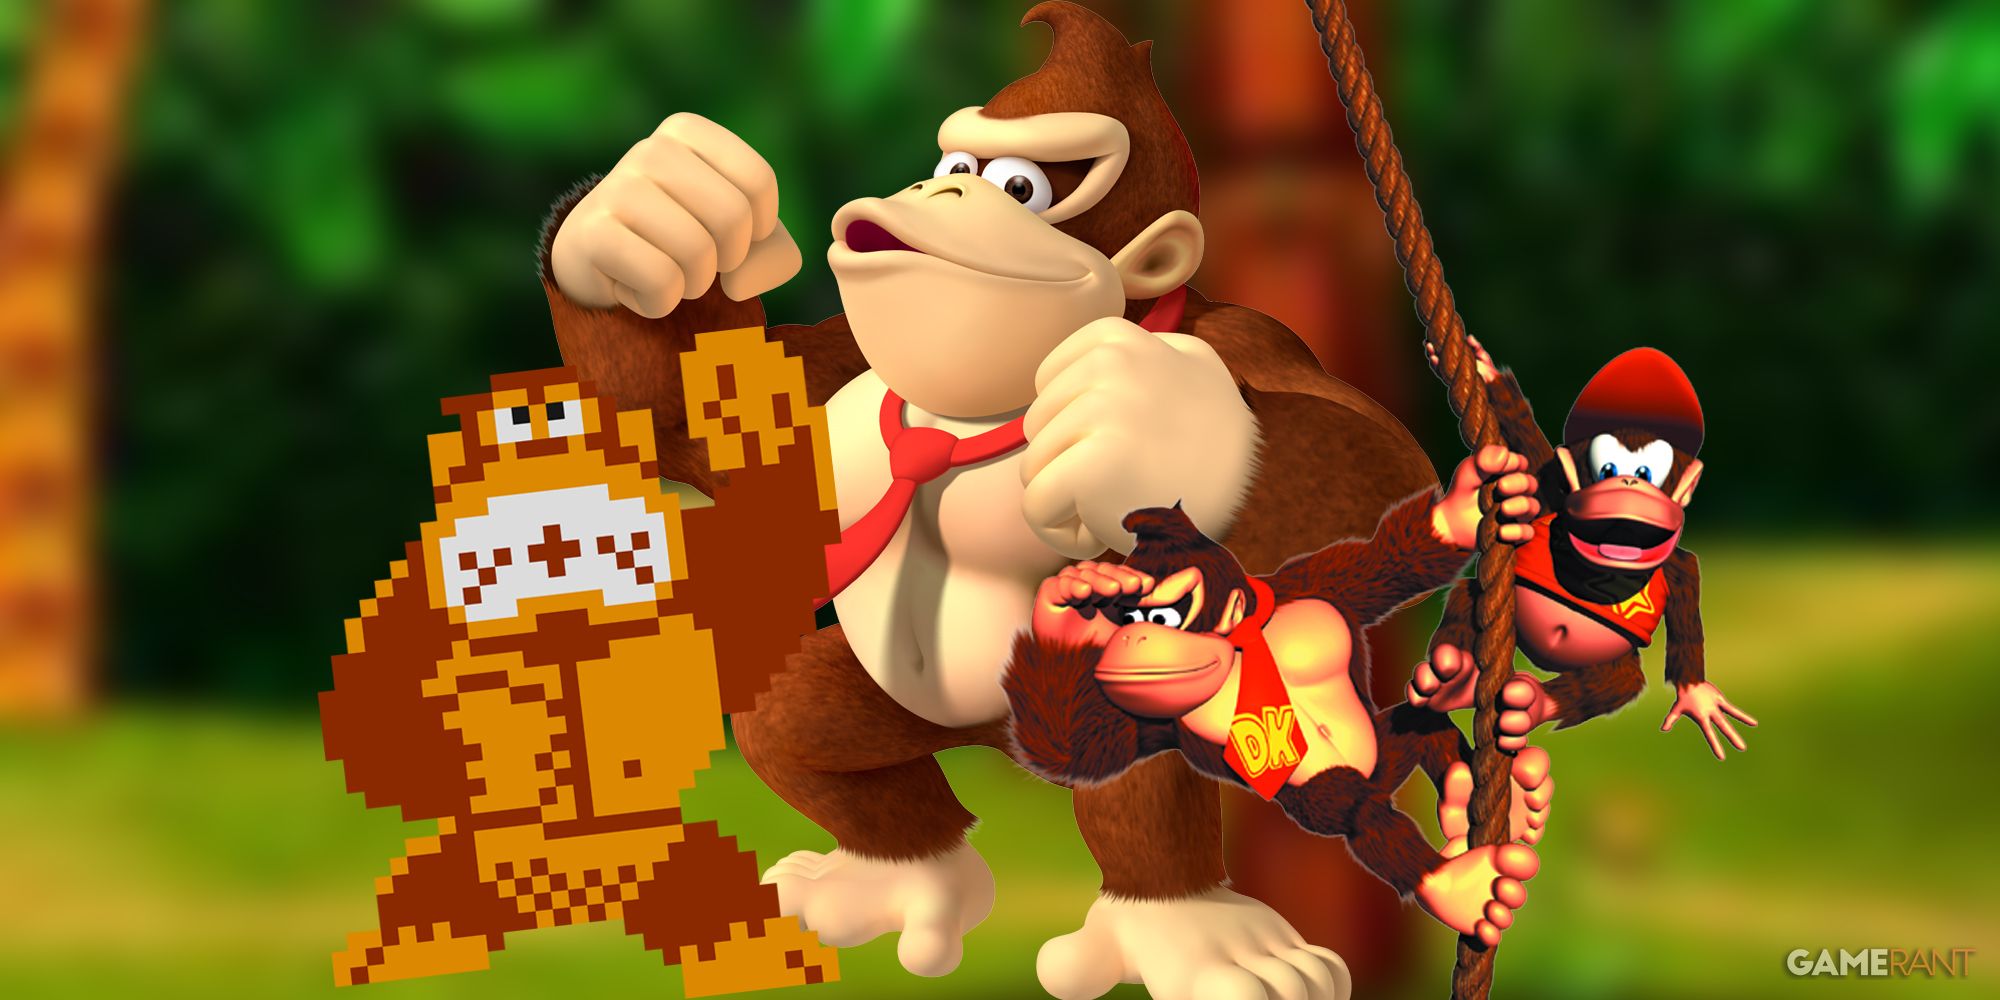 Arcade, modern, and SNES iterations of Donkey Kong and Diddy Kong